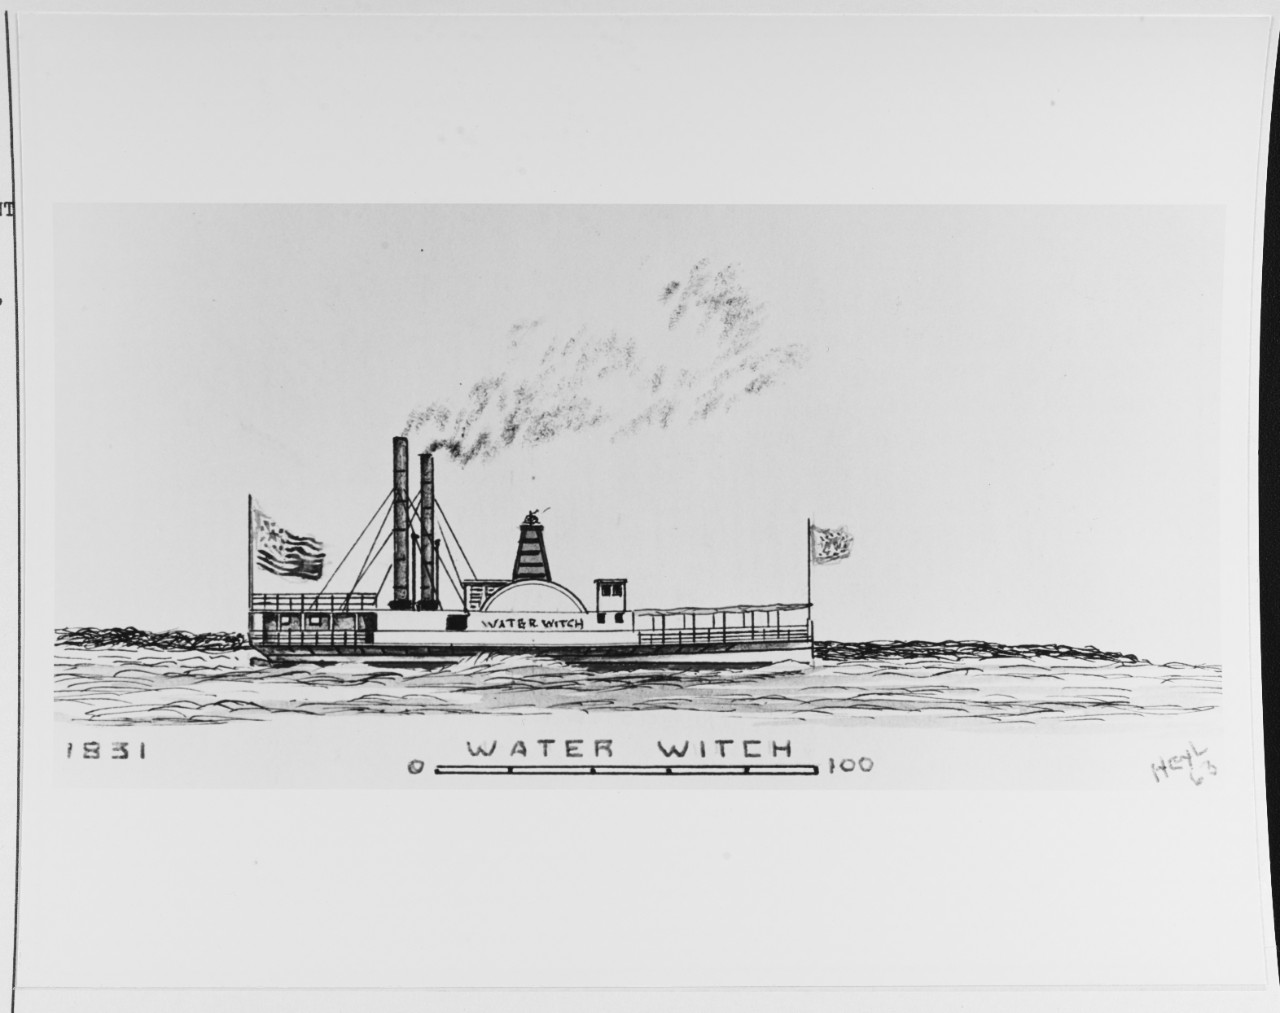 WATER WITCH (American Merchant Steamer, 1831-62)